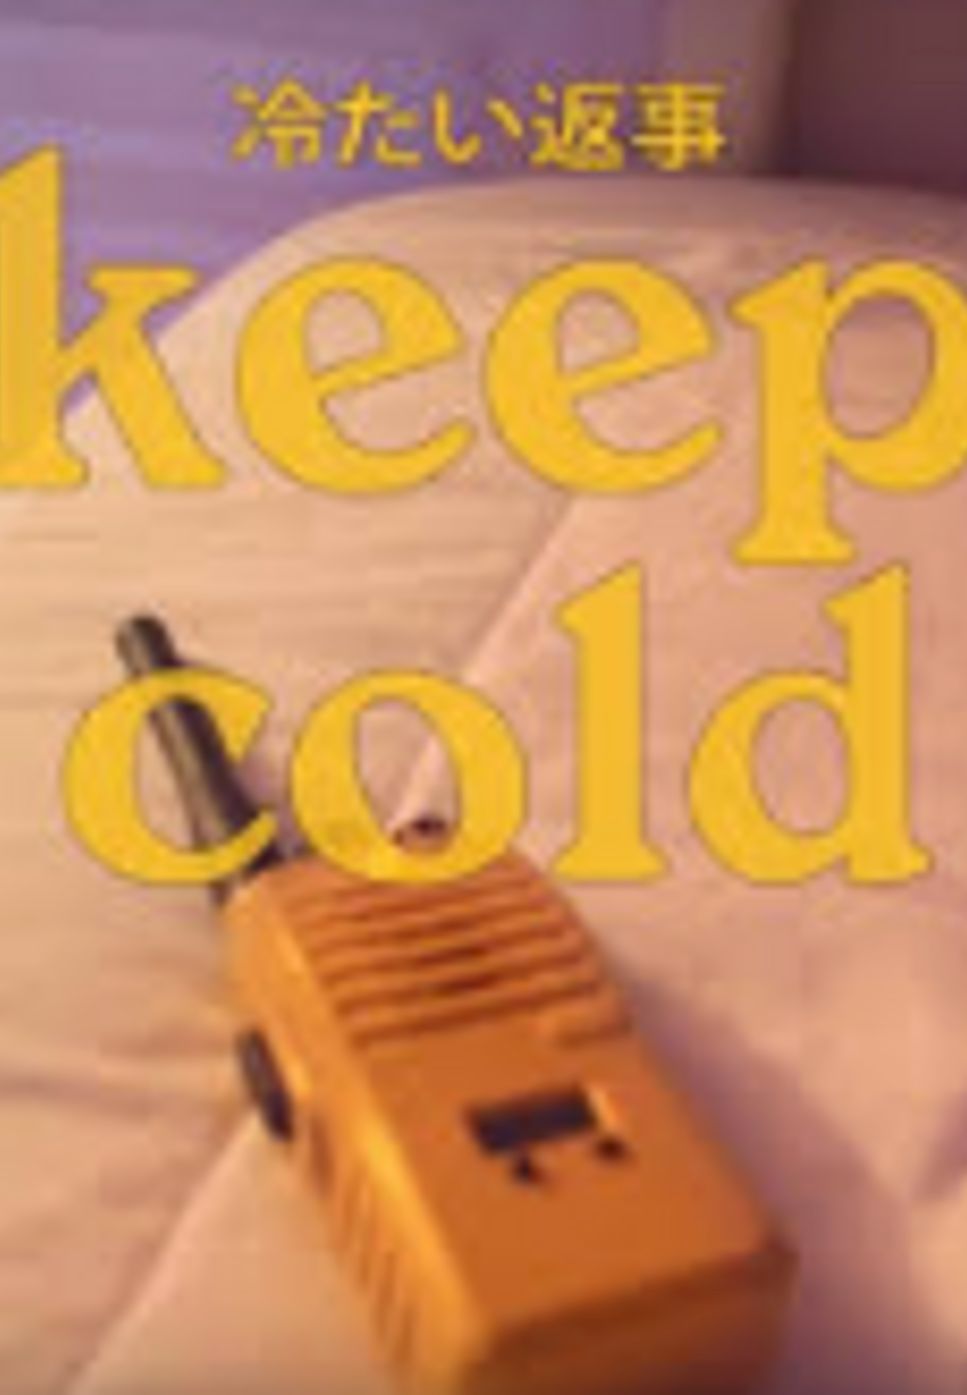 Numcha - Keep Cold (solo) by Qmo